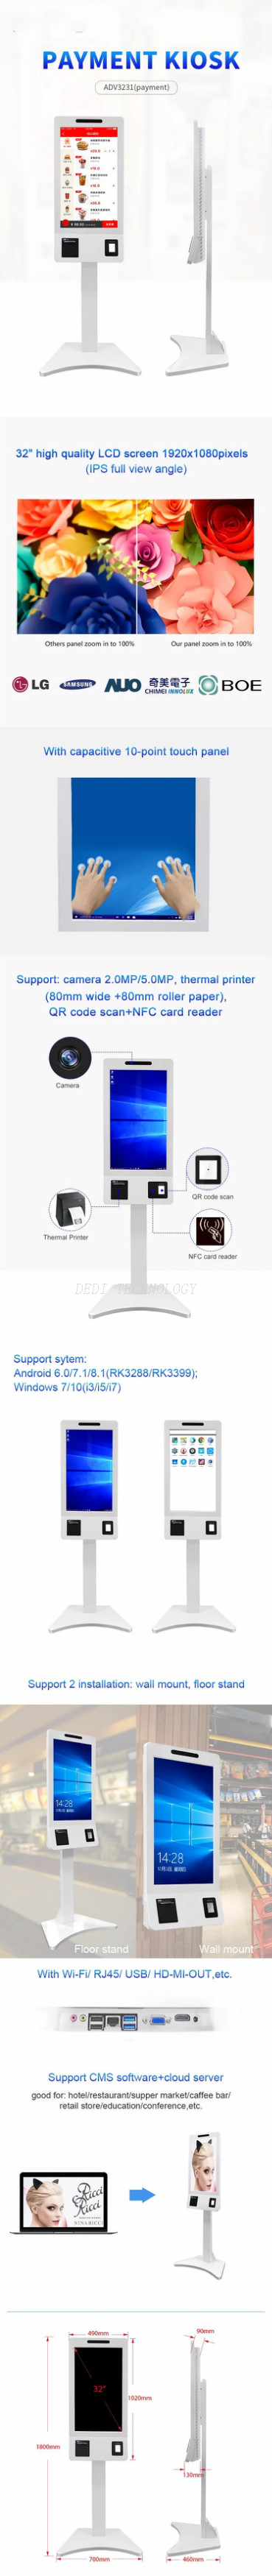 Aiyos-24-Inch-Touch-Android-Interactive-Self-Service-Payment-Kiosk-Vending-Machine-for-Restaurant-Ordering.webp (5)_meitu_2